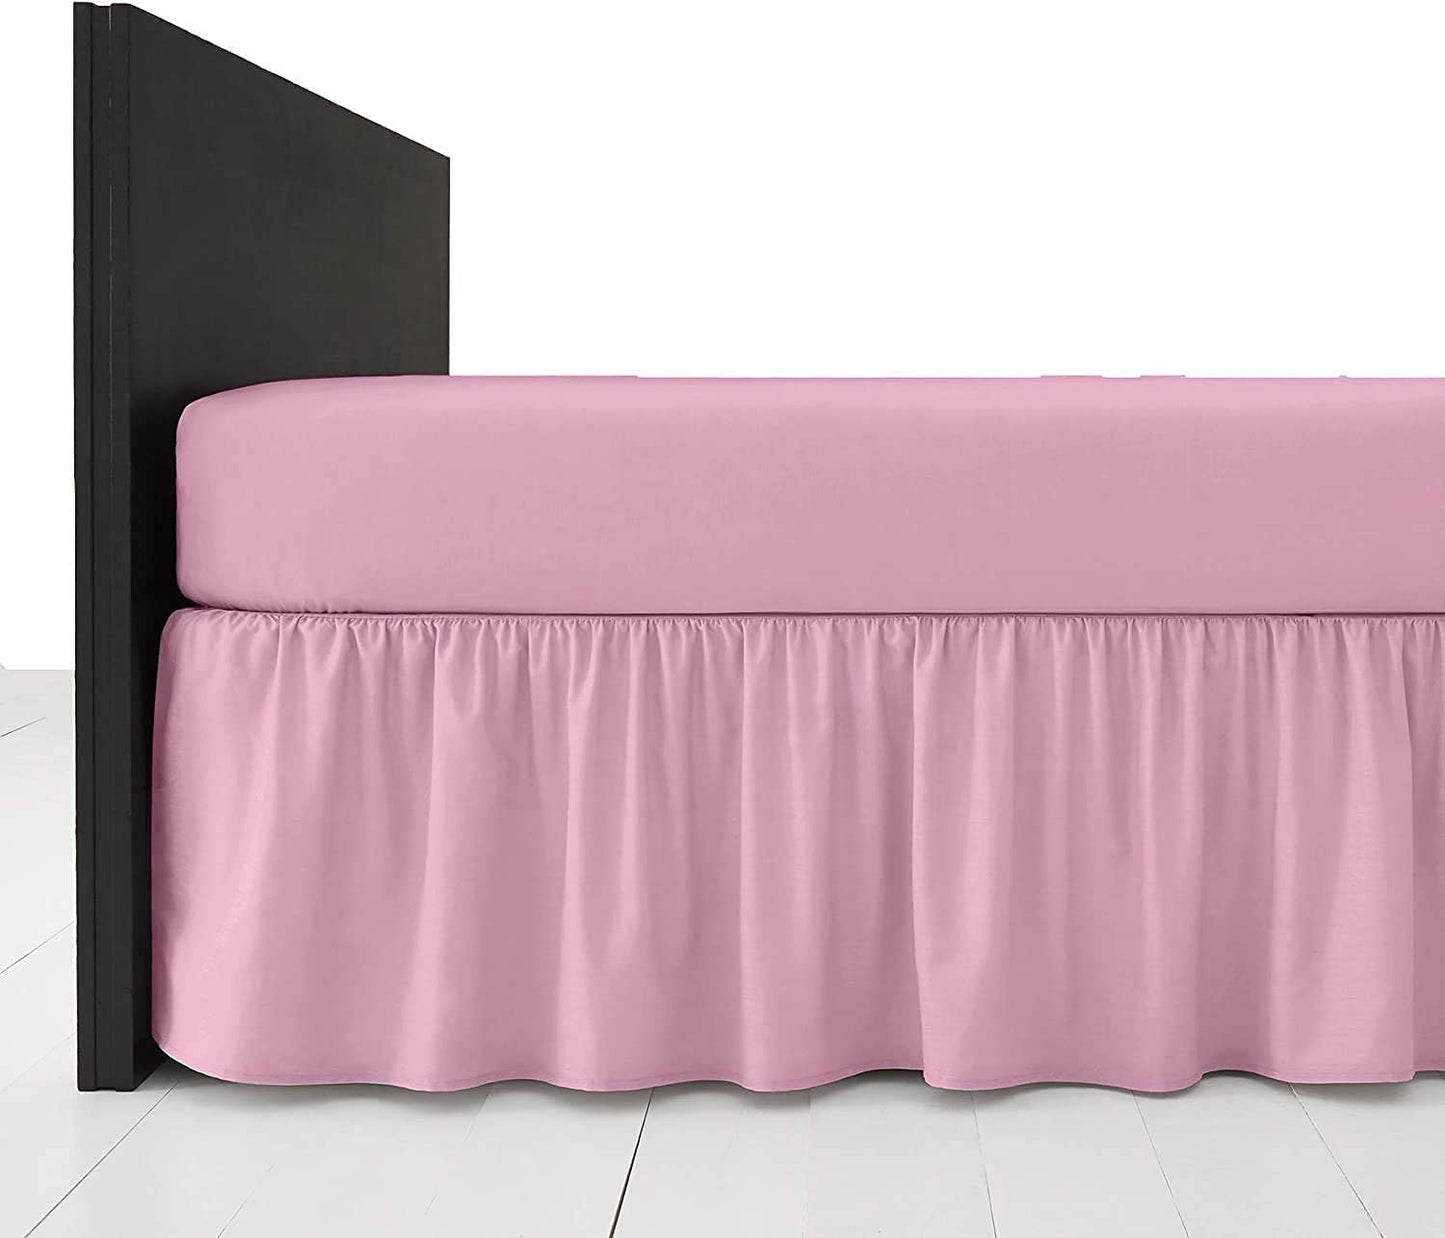 Double Bed Pink Base Valance Sheet Polycotton 180 Thread Count Percale